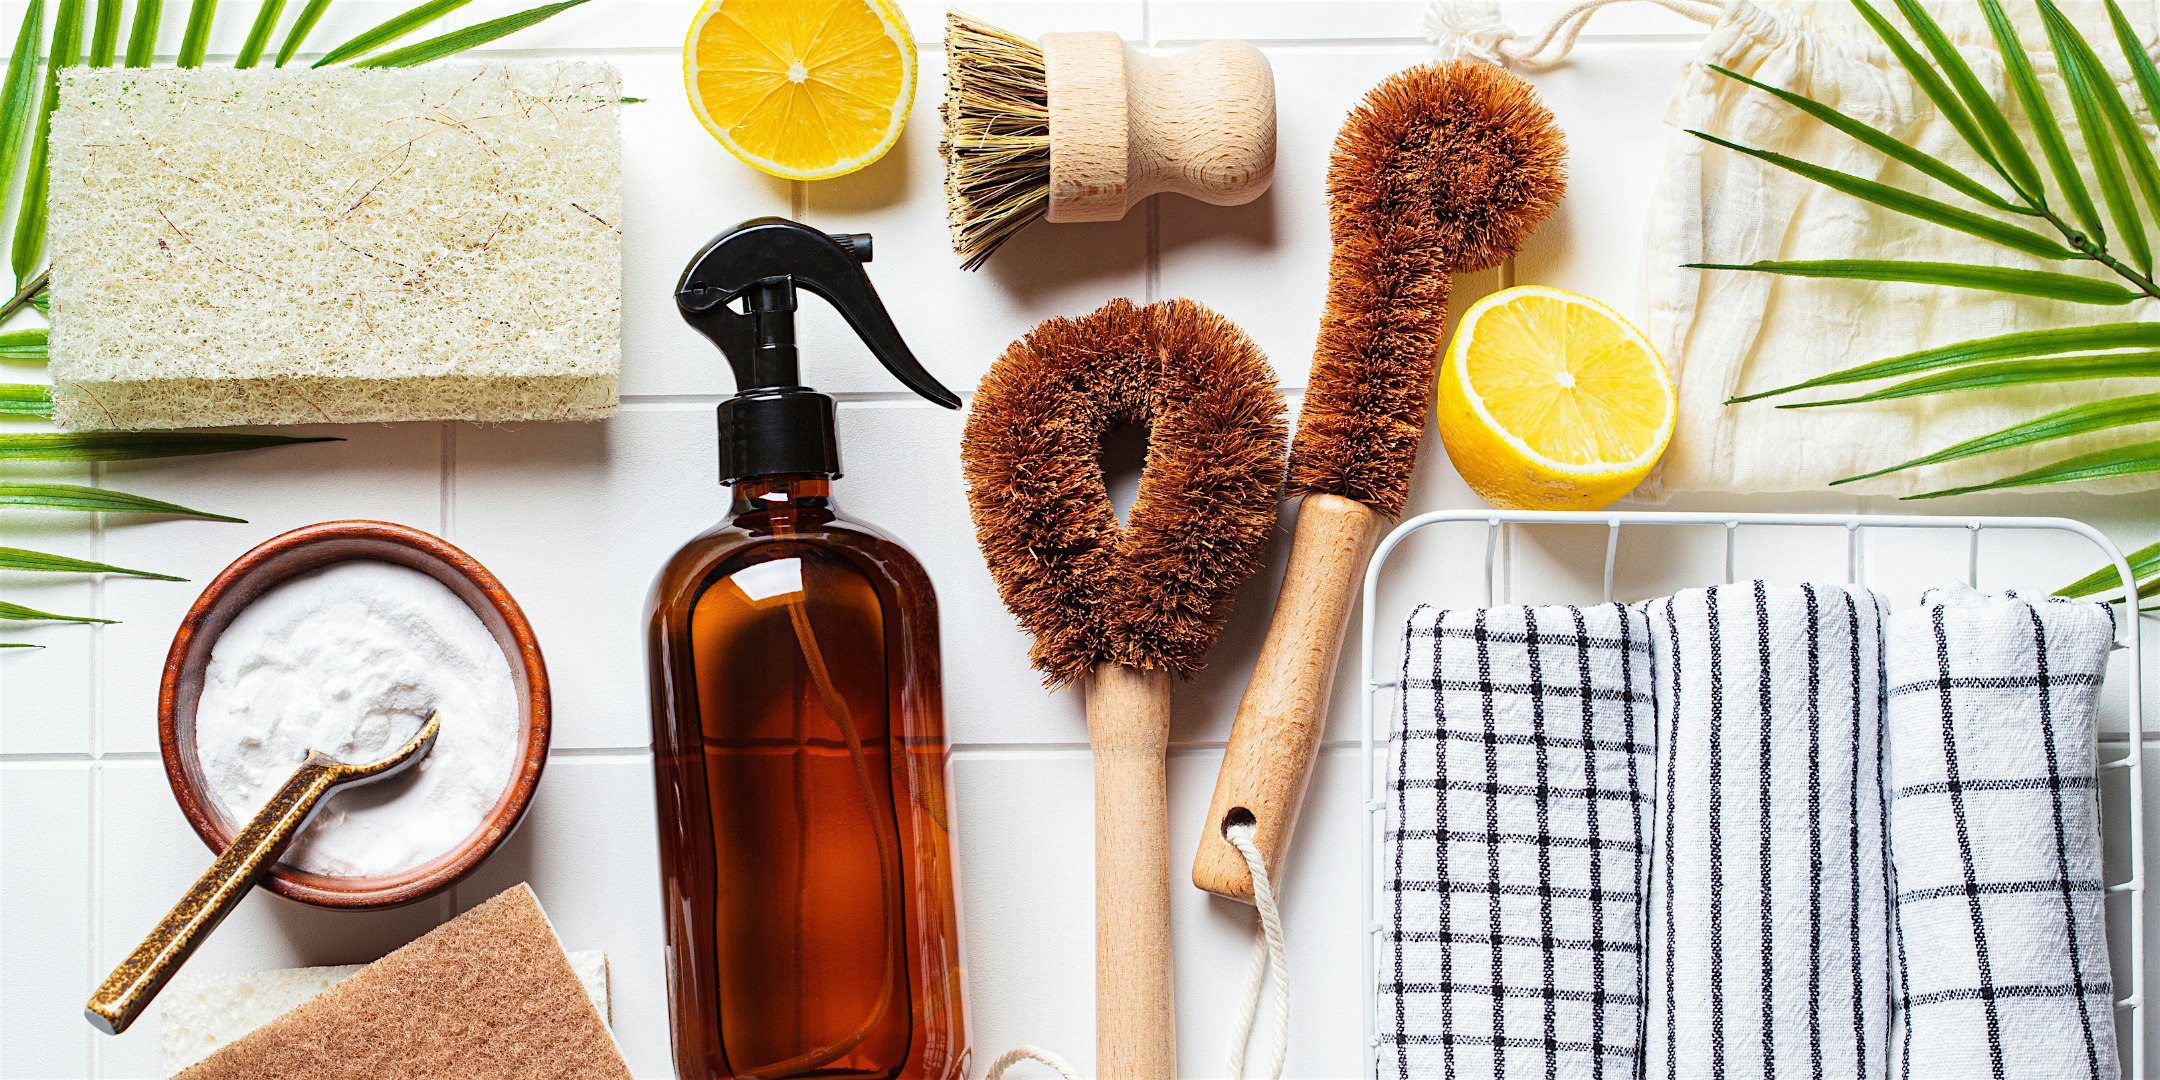 Exploring Natural Home Cleaning Products